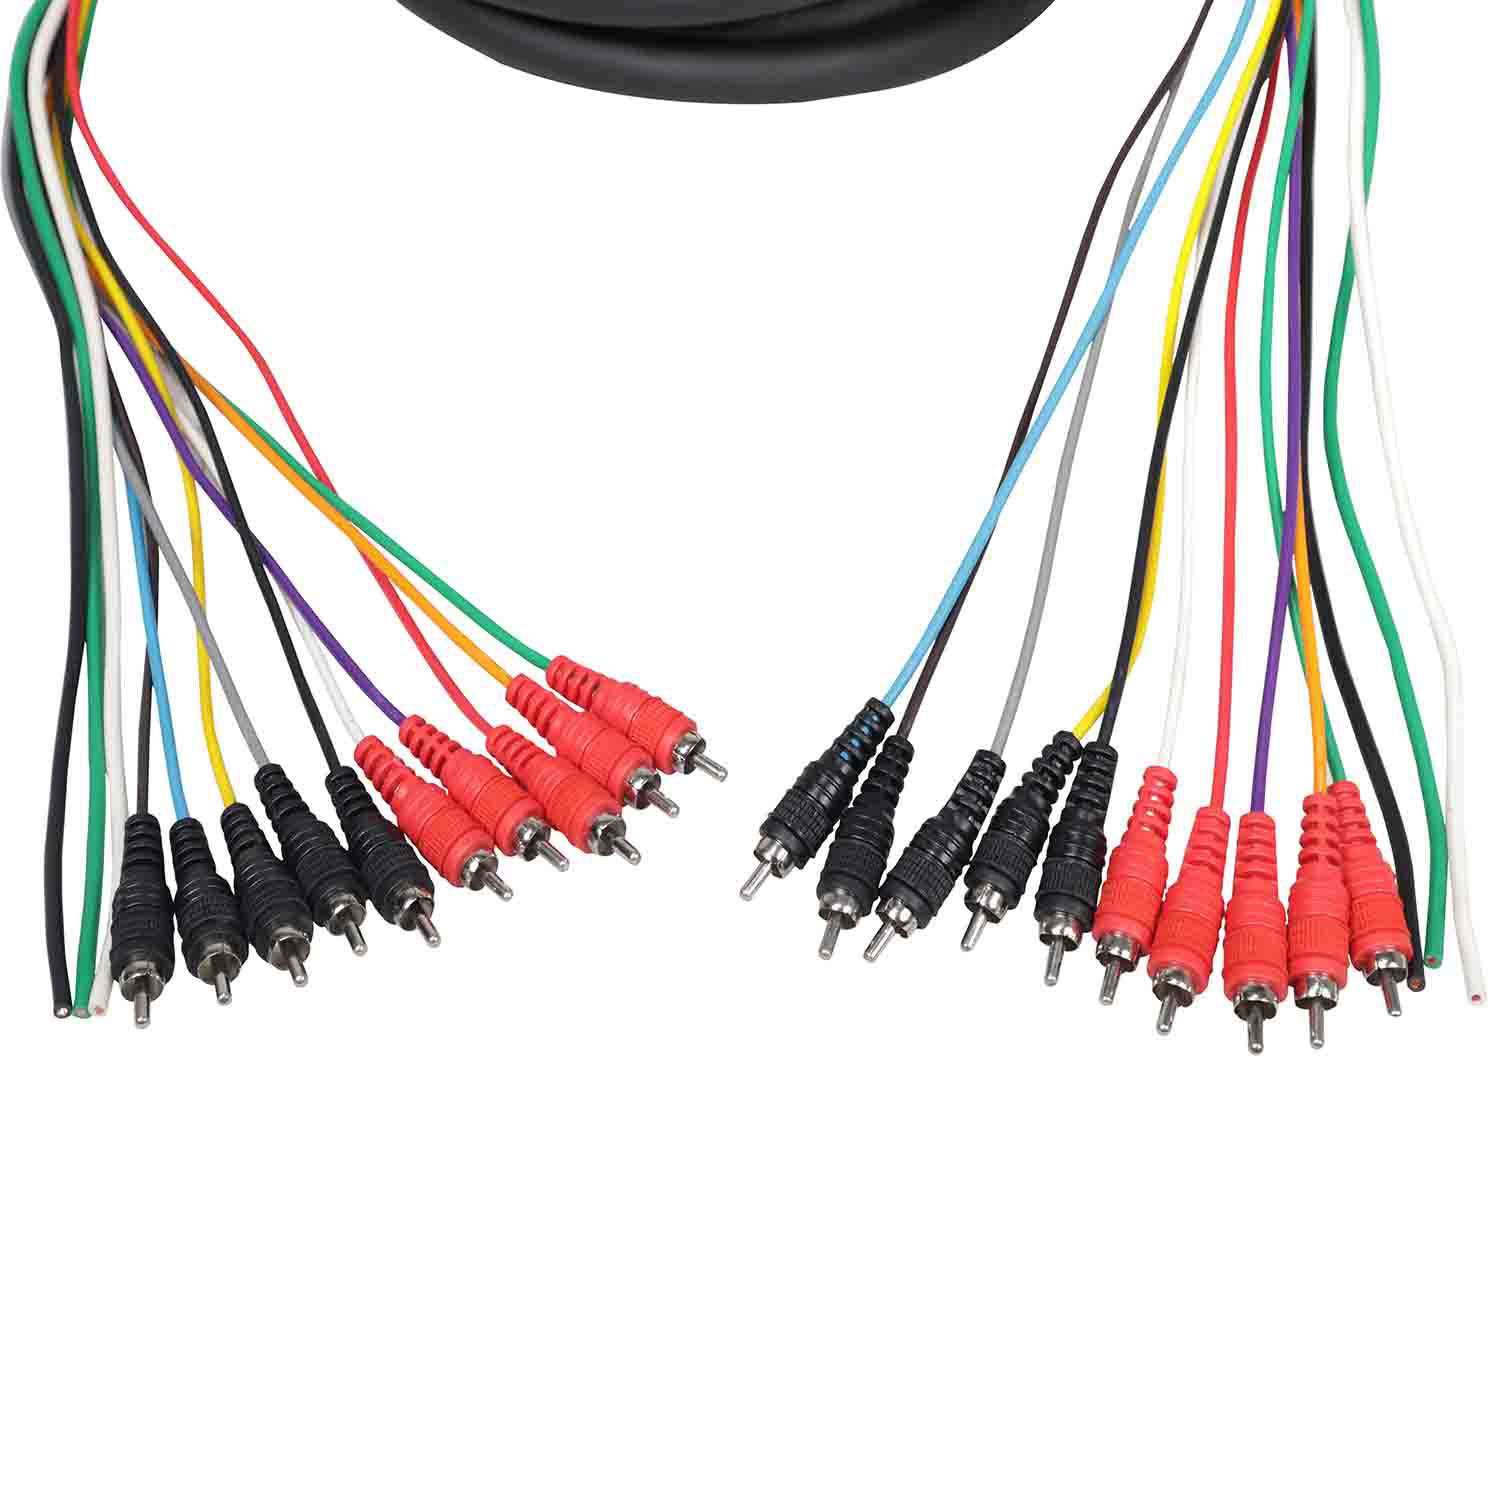 ProX XC-MEDOOZA100, 10 RCA Channel + 3 Power Cable for Marine and Car Audio - 100 Feet - Hollywood DJ